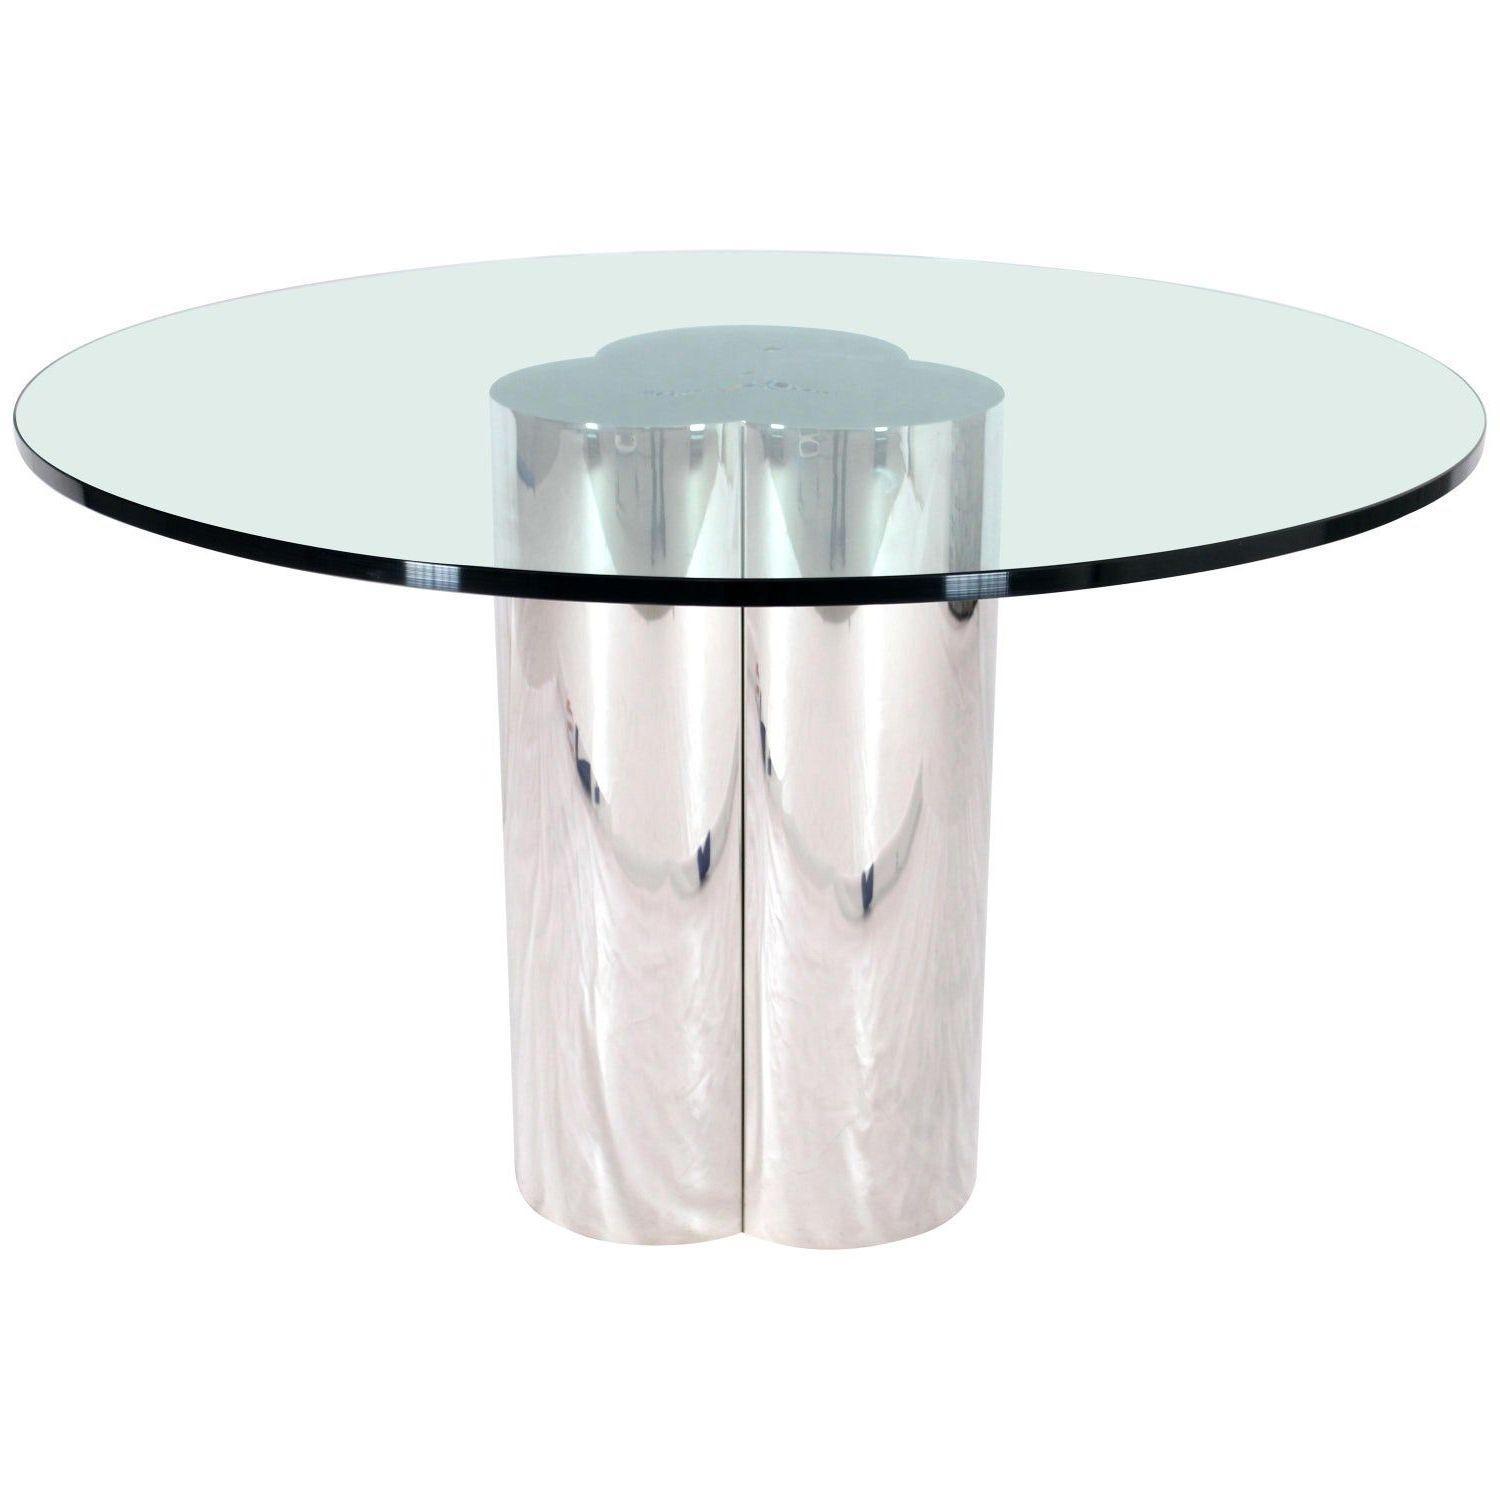 Triple Chrome Cylinder Base Glass Top Round Center Dining Conference Table Within 2019 Polished Chrome Round Cocktail Tables (View 5 of 10)